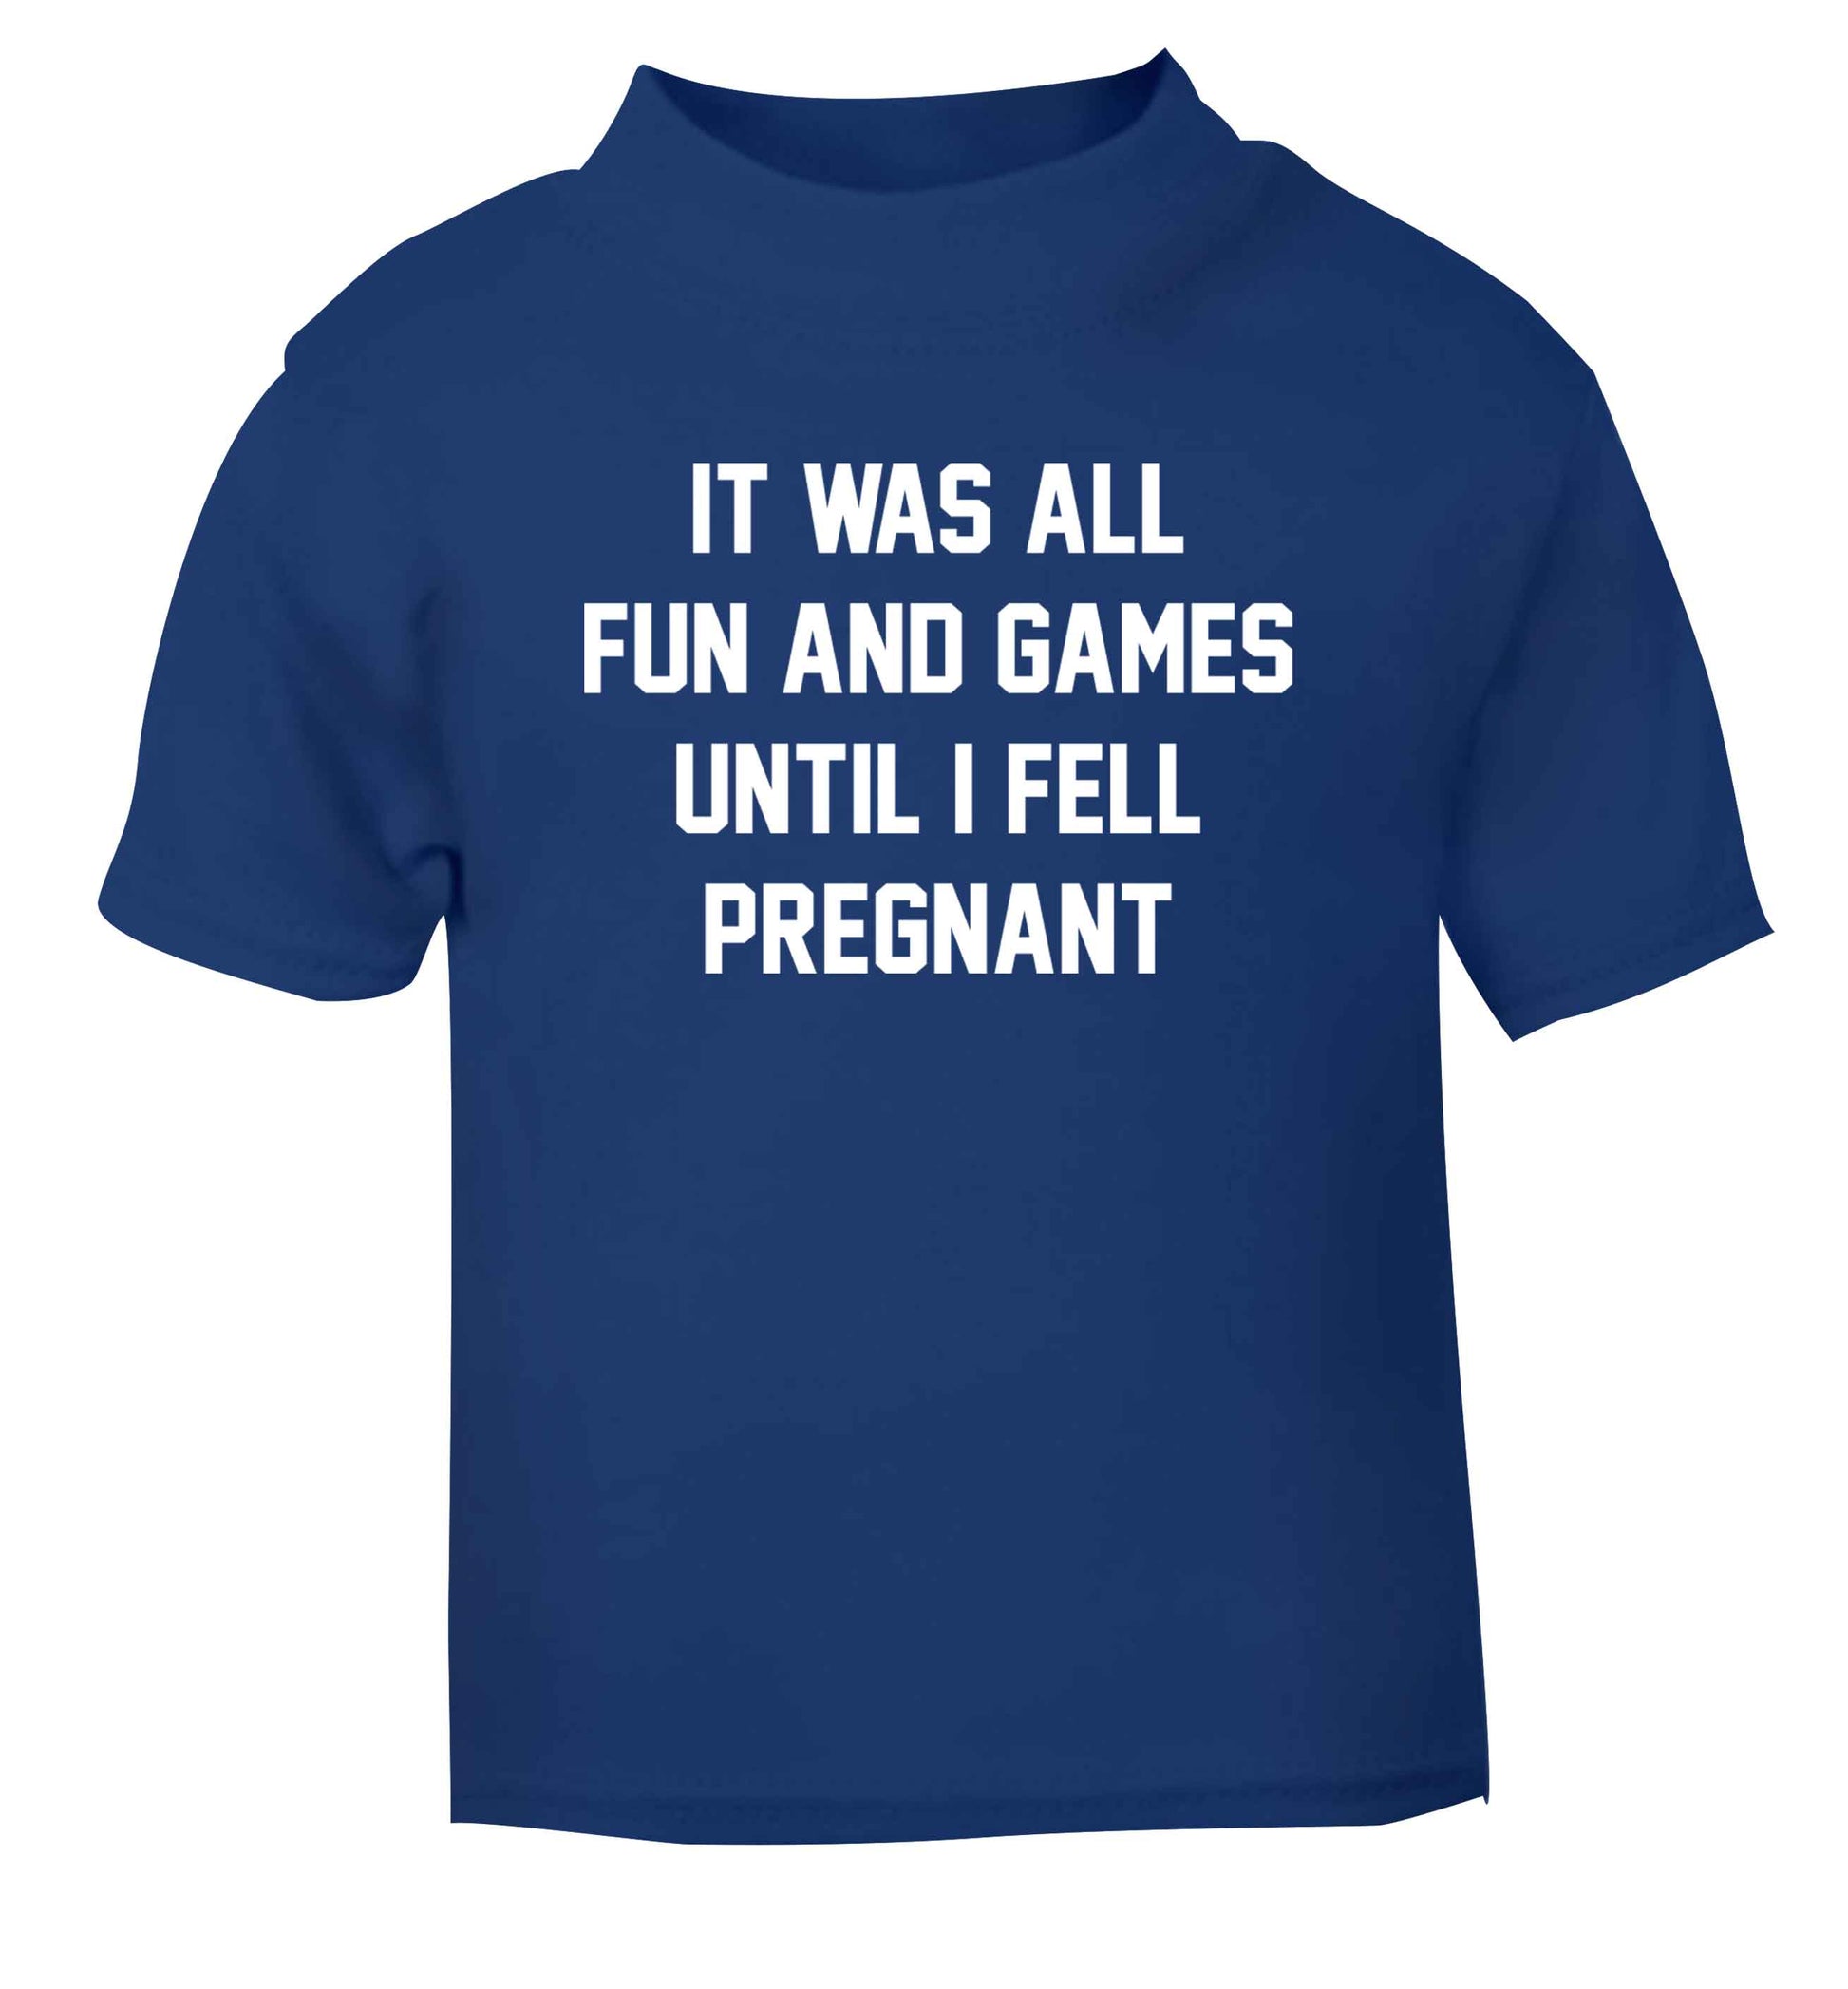 It was all fun and games until I fell pregnant kicks blue Baby Toddler Tshirt 2 Years